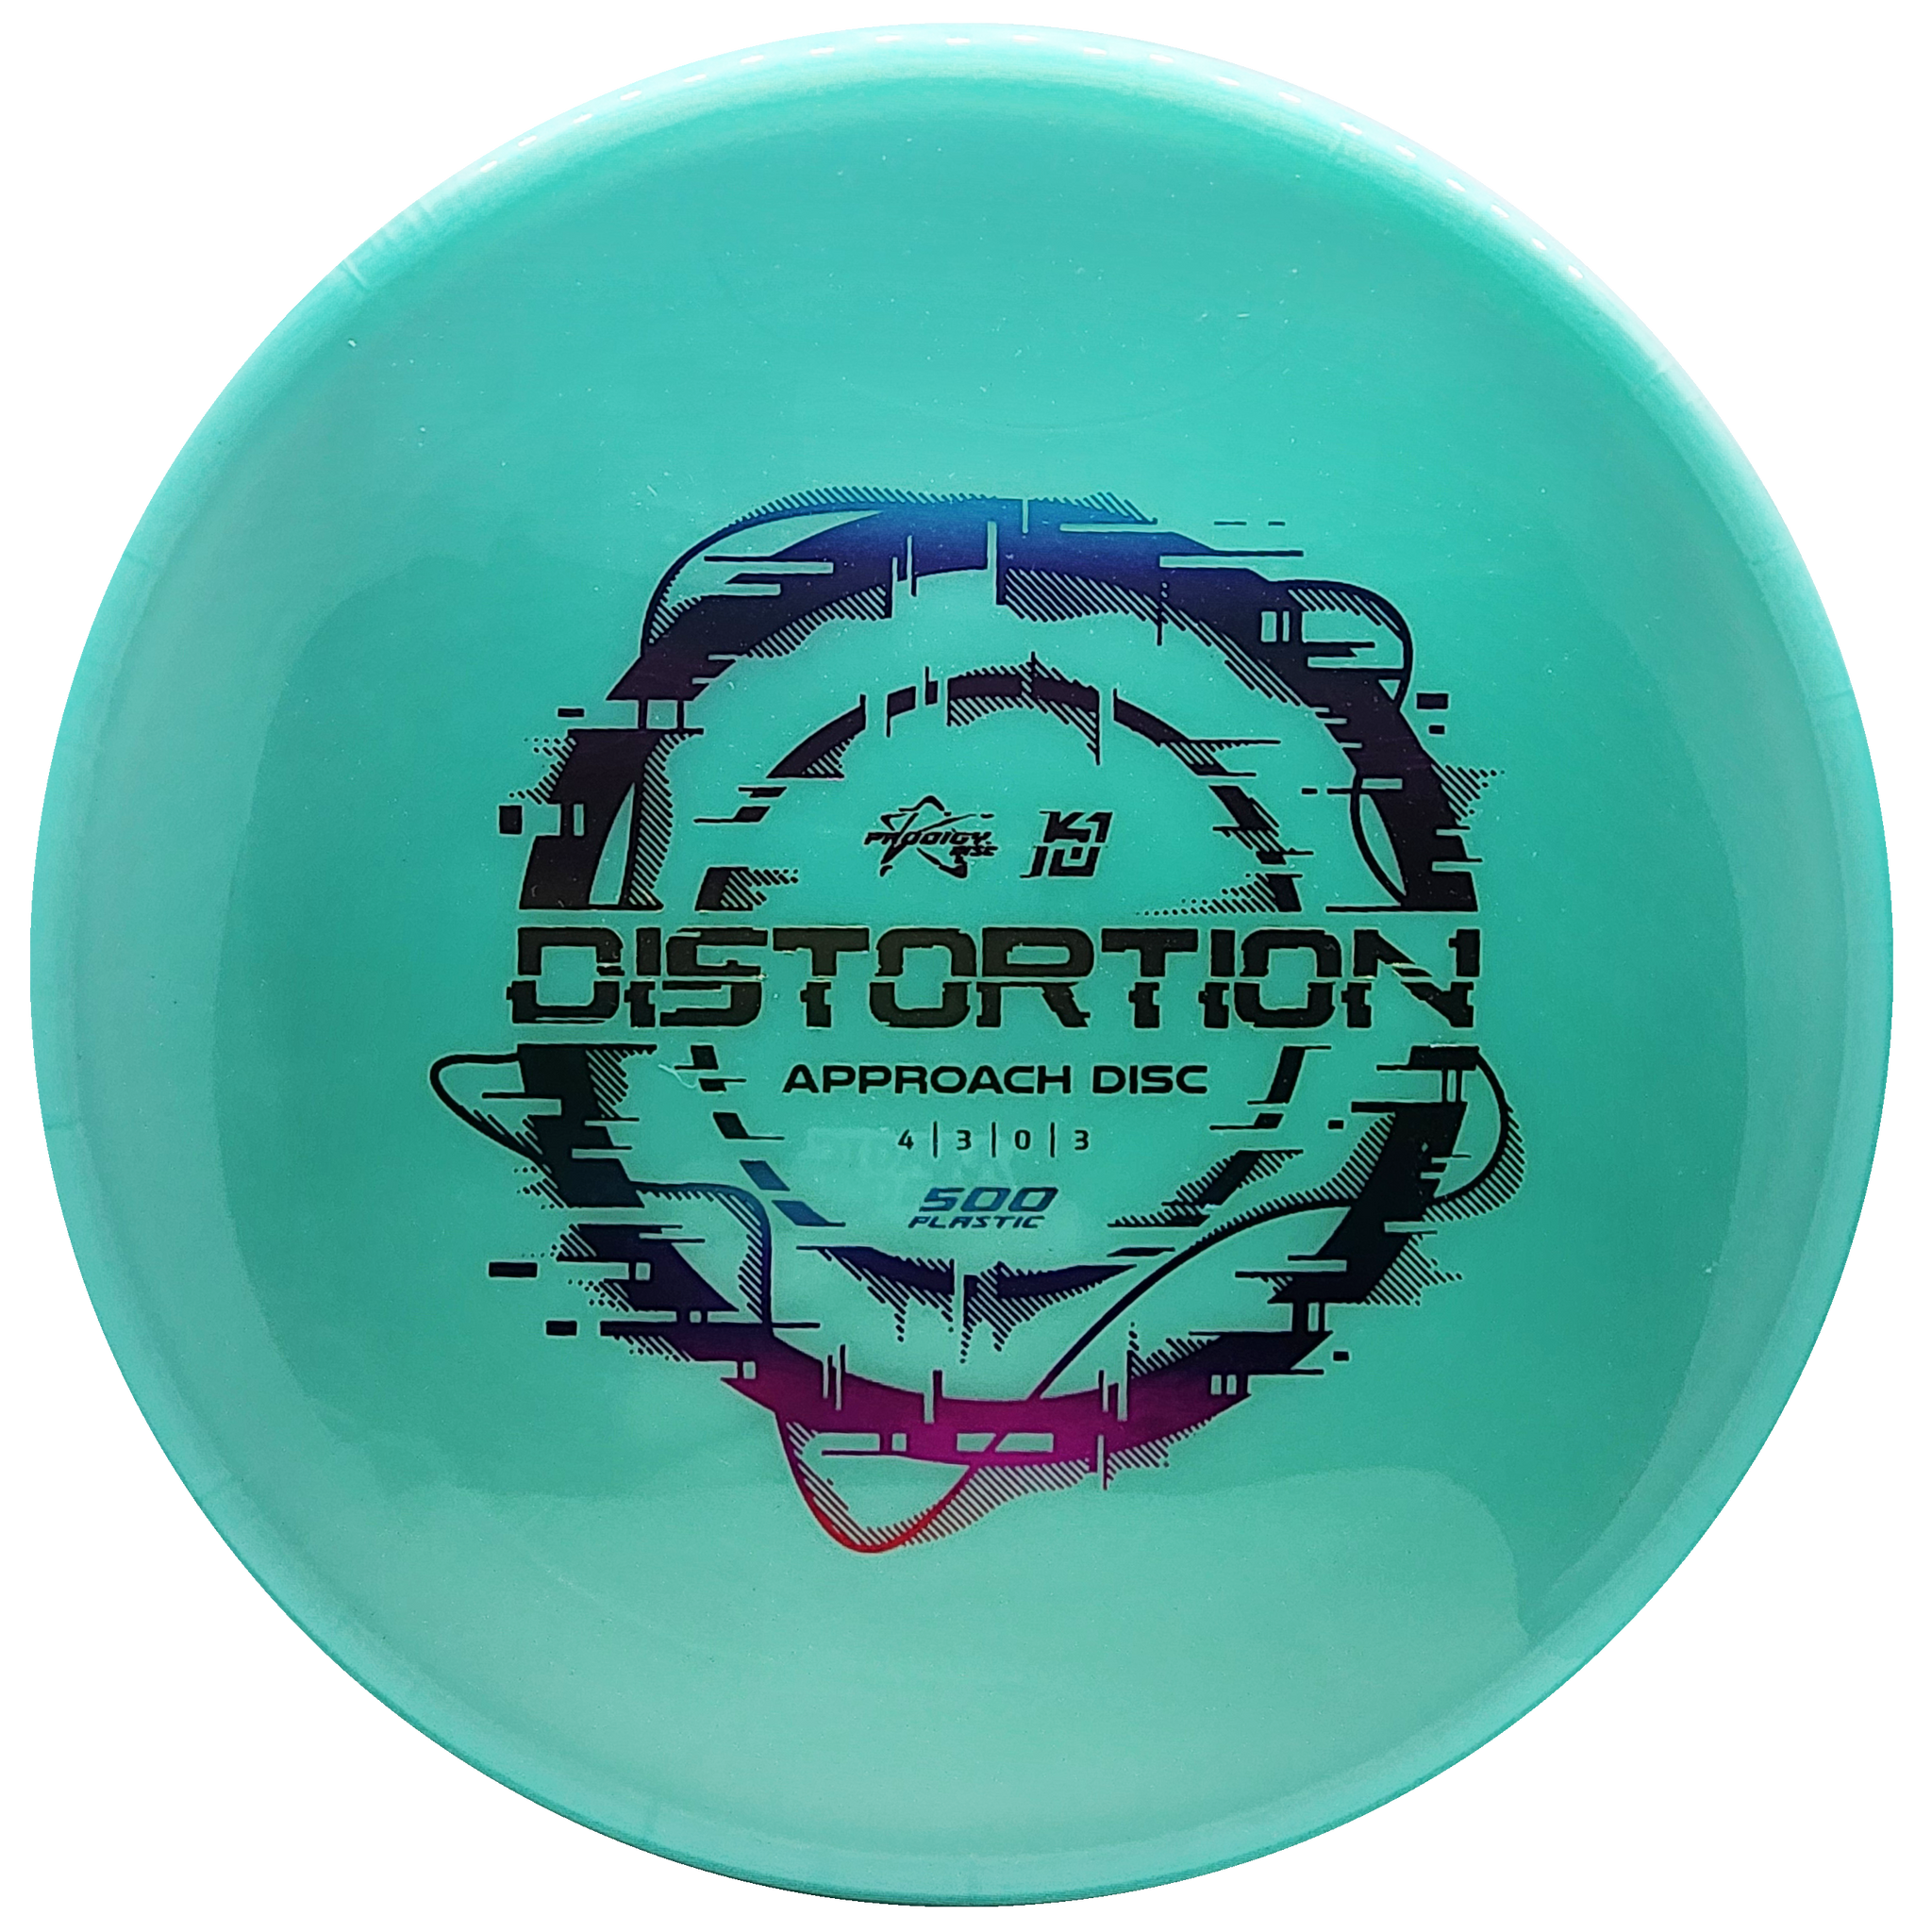 Prodigy: Kevin Jones Distortion Approach Disc - 500 Plastic - Teal/Rainbow